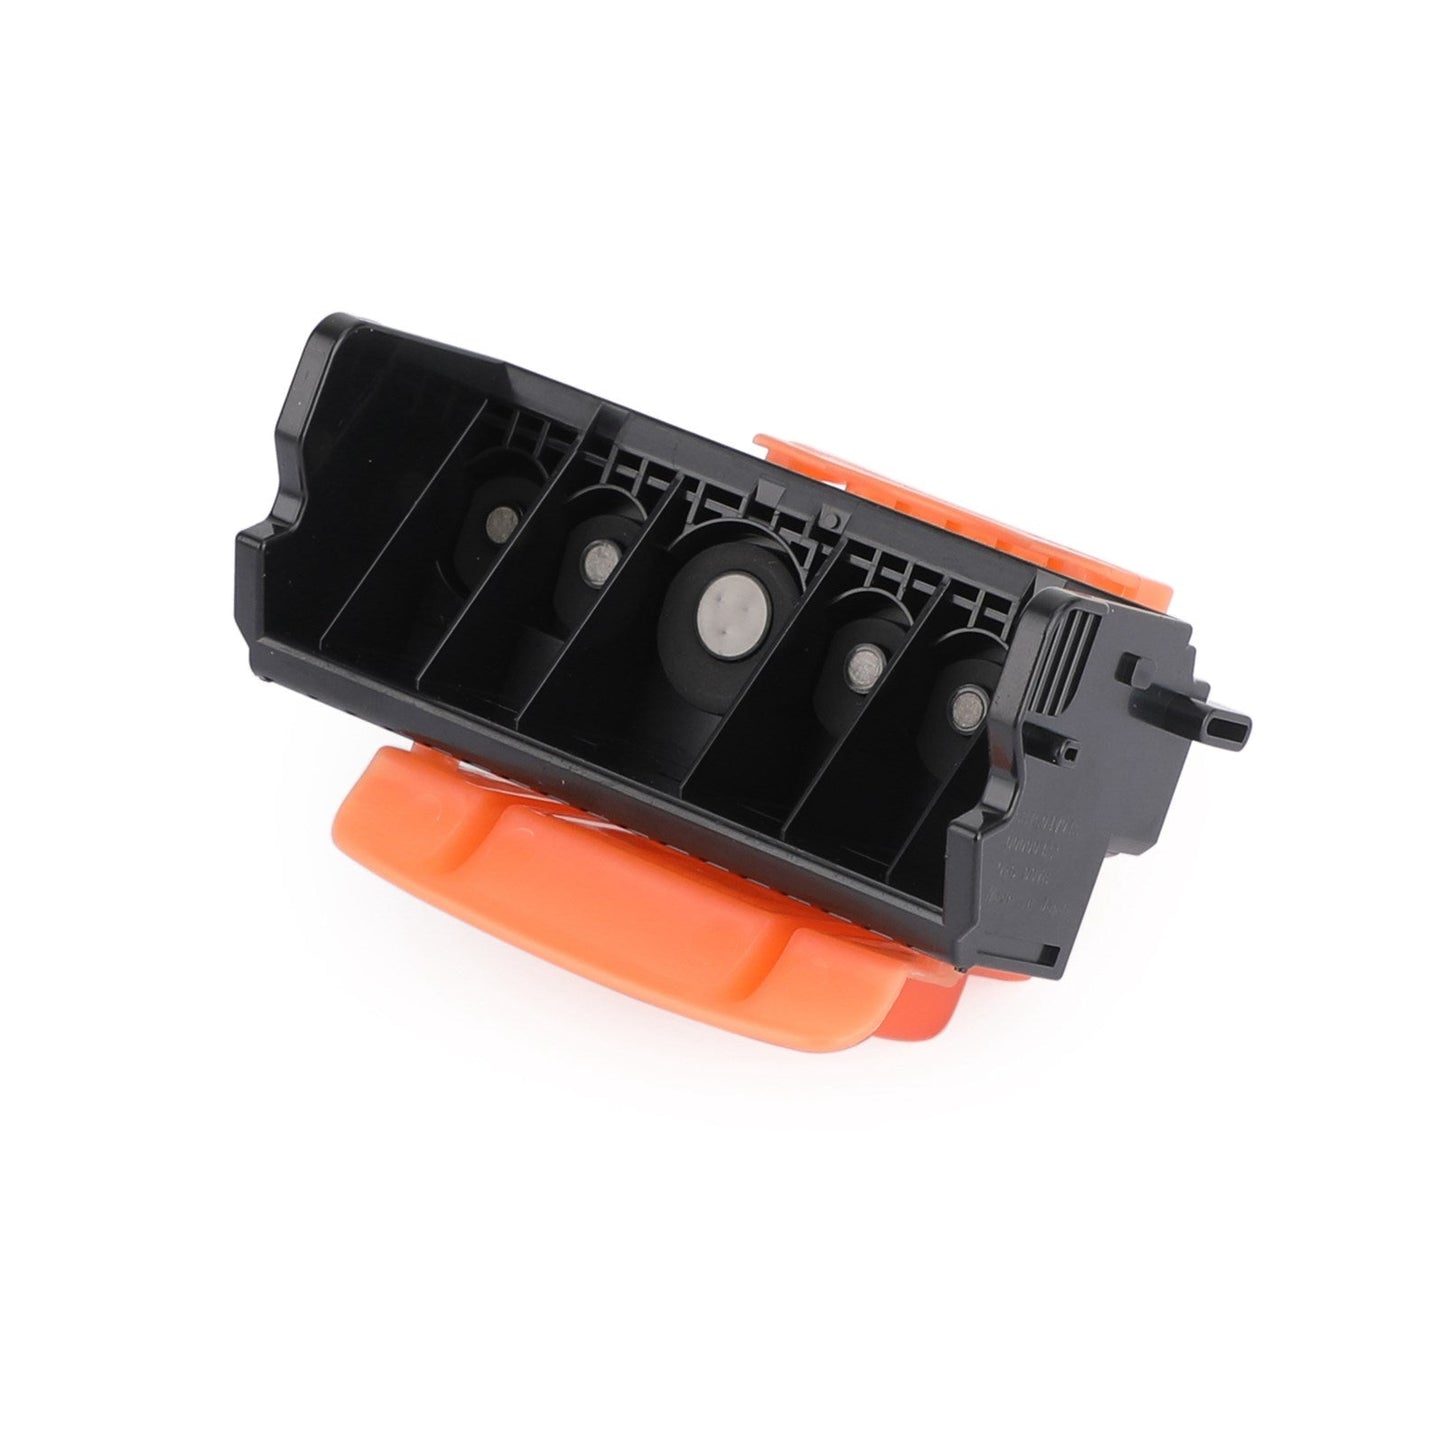 Replacement Printer Print Head QY6-0070 For MP510 MP520 MX700 iP3300 iP3500